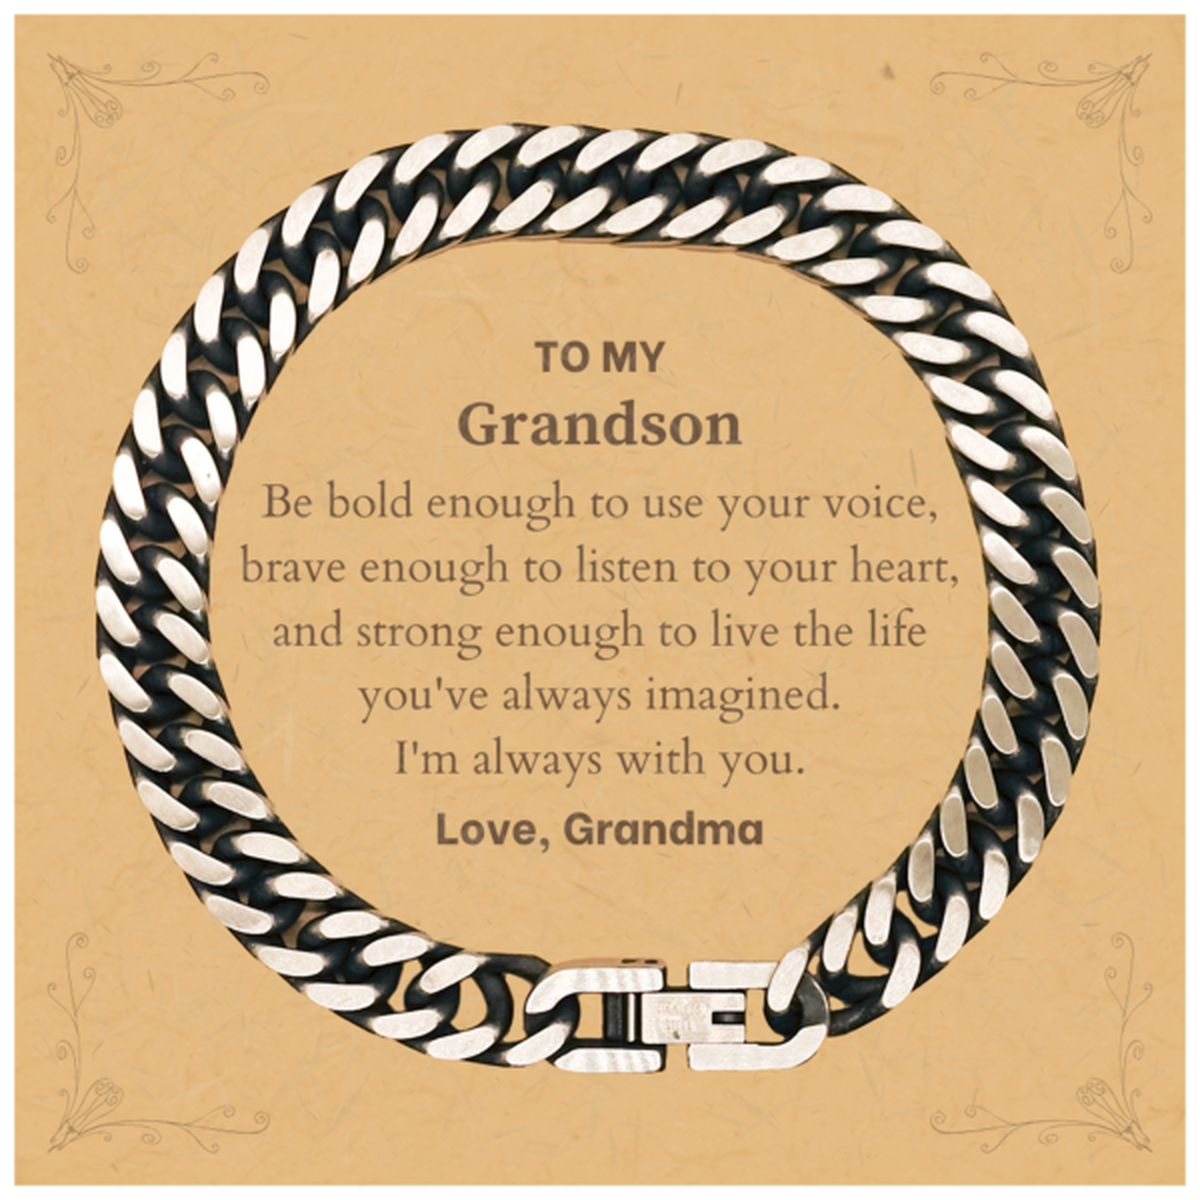 Keepsake Grandson Cuban Link Chain Bracelet Gift Idea Graduation Christmas Birthday Grandson from Grandma, Grandson Be bold enough to use your voice, brave enough to listen to your heart. Love, Grandma